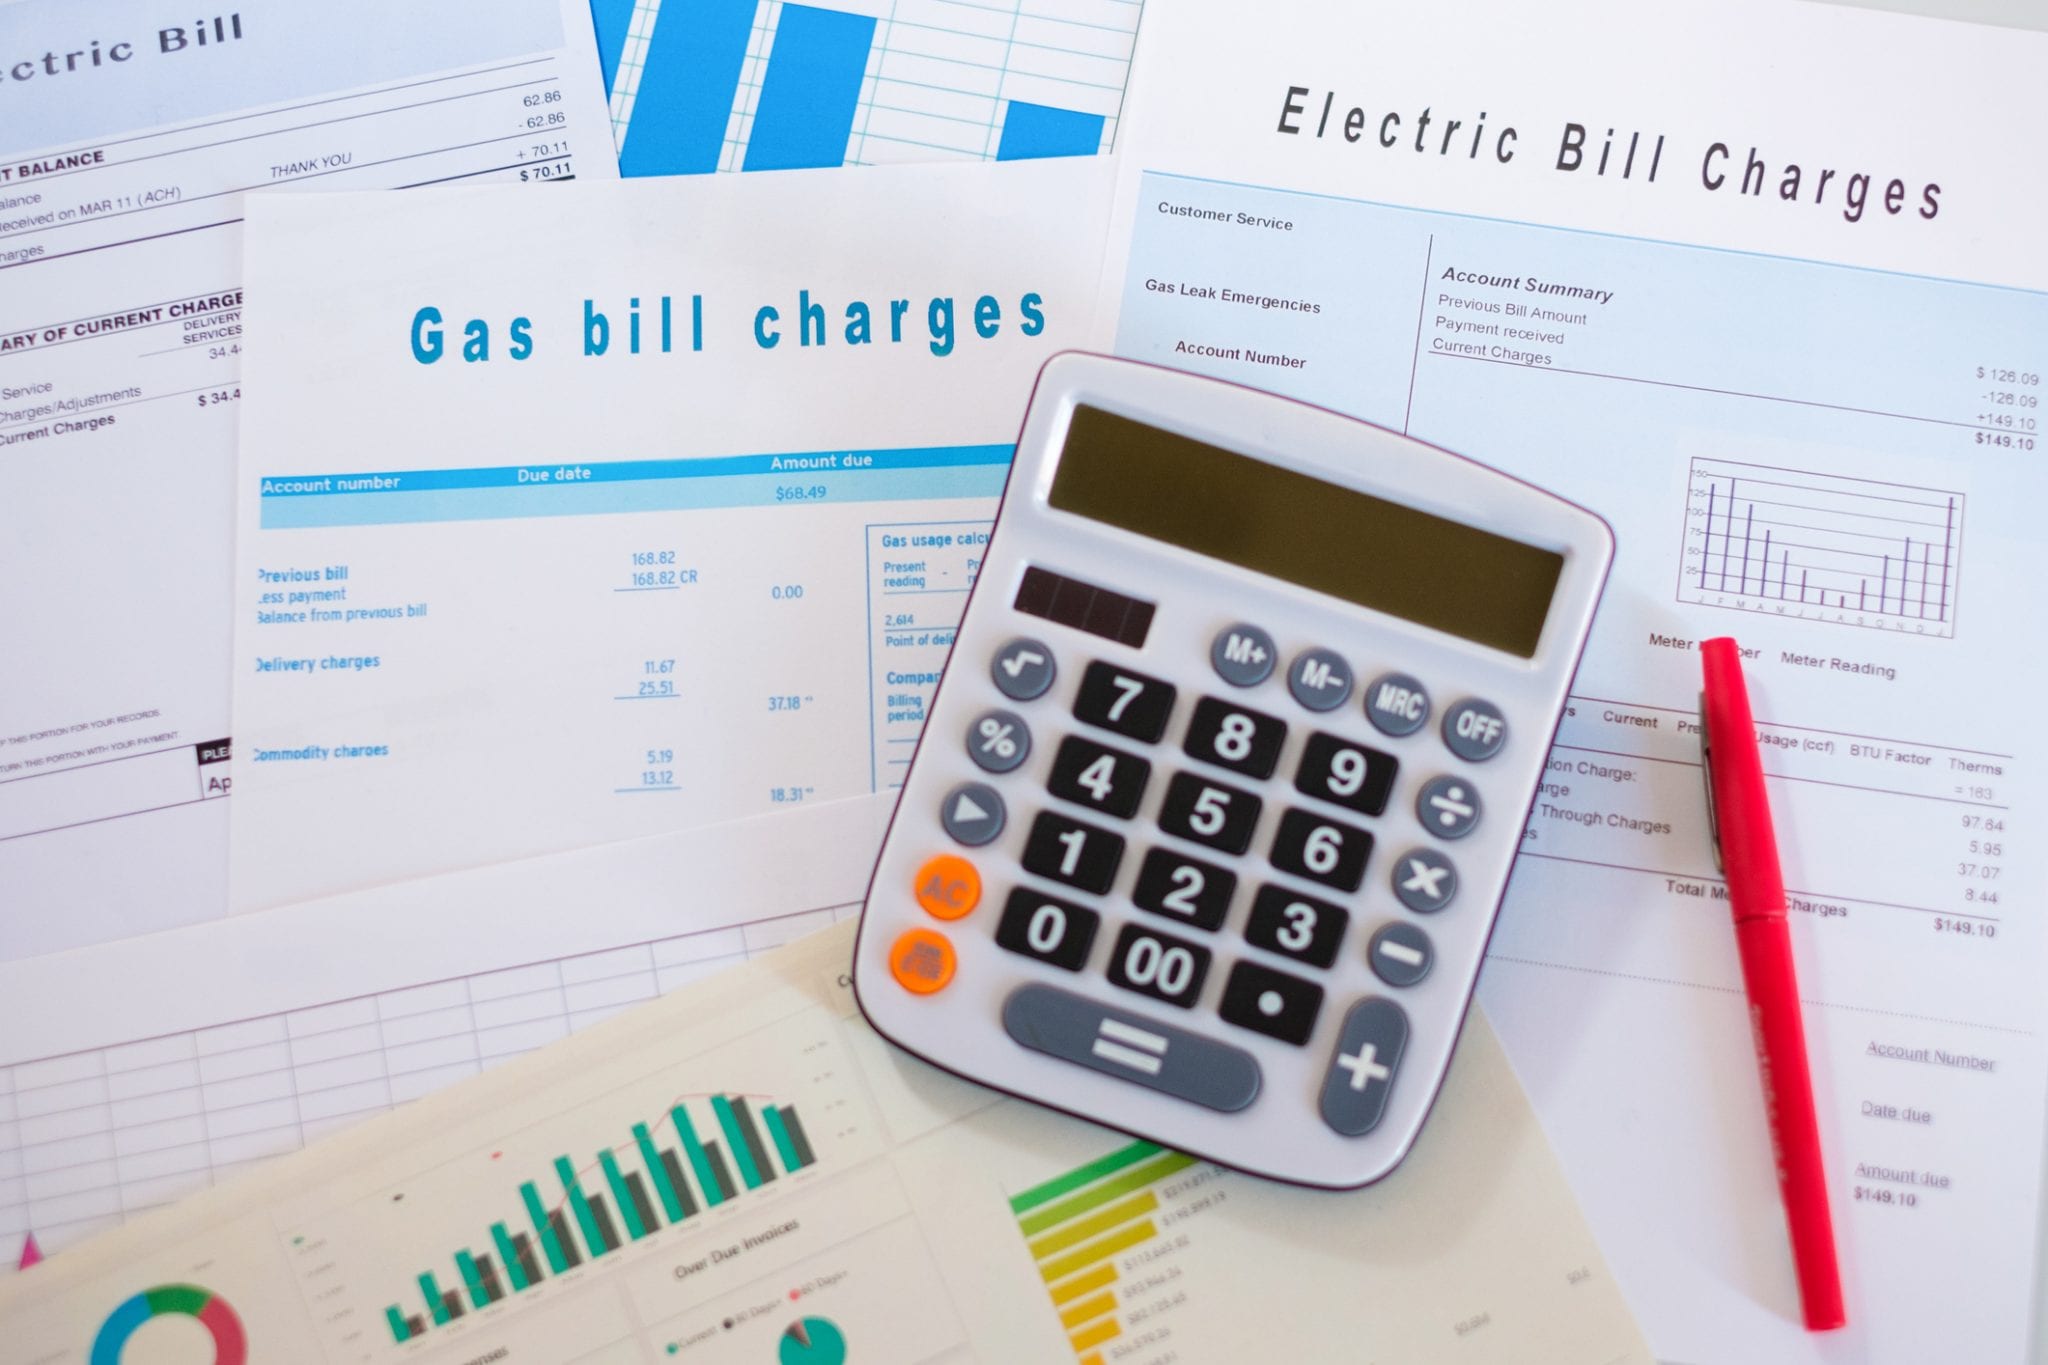 Desk calculator with invoices for energy and electric bills as elements of calculating a generator maintenance budget.